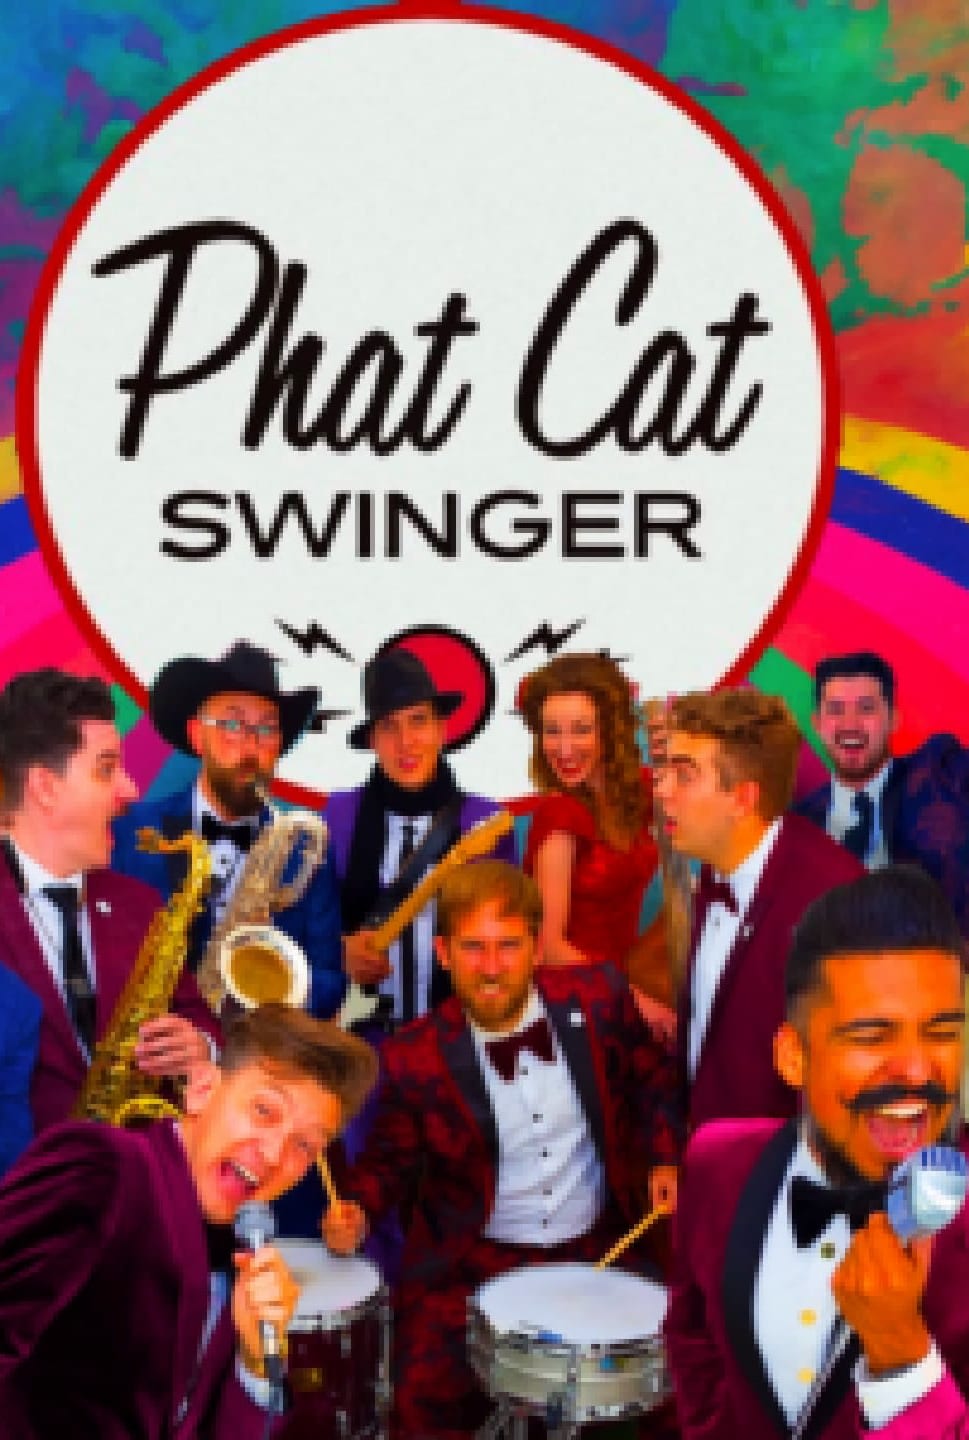 Phat Cat Swinger – Hollywood's Hottest Little Big Band show poster